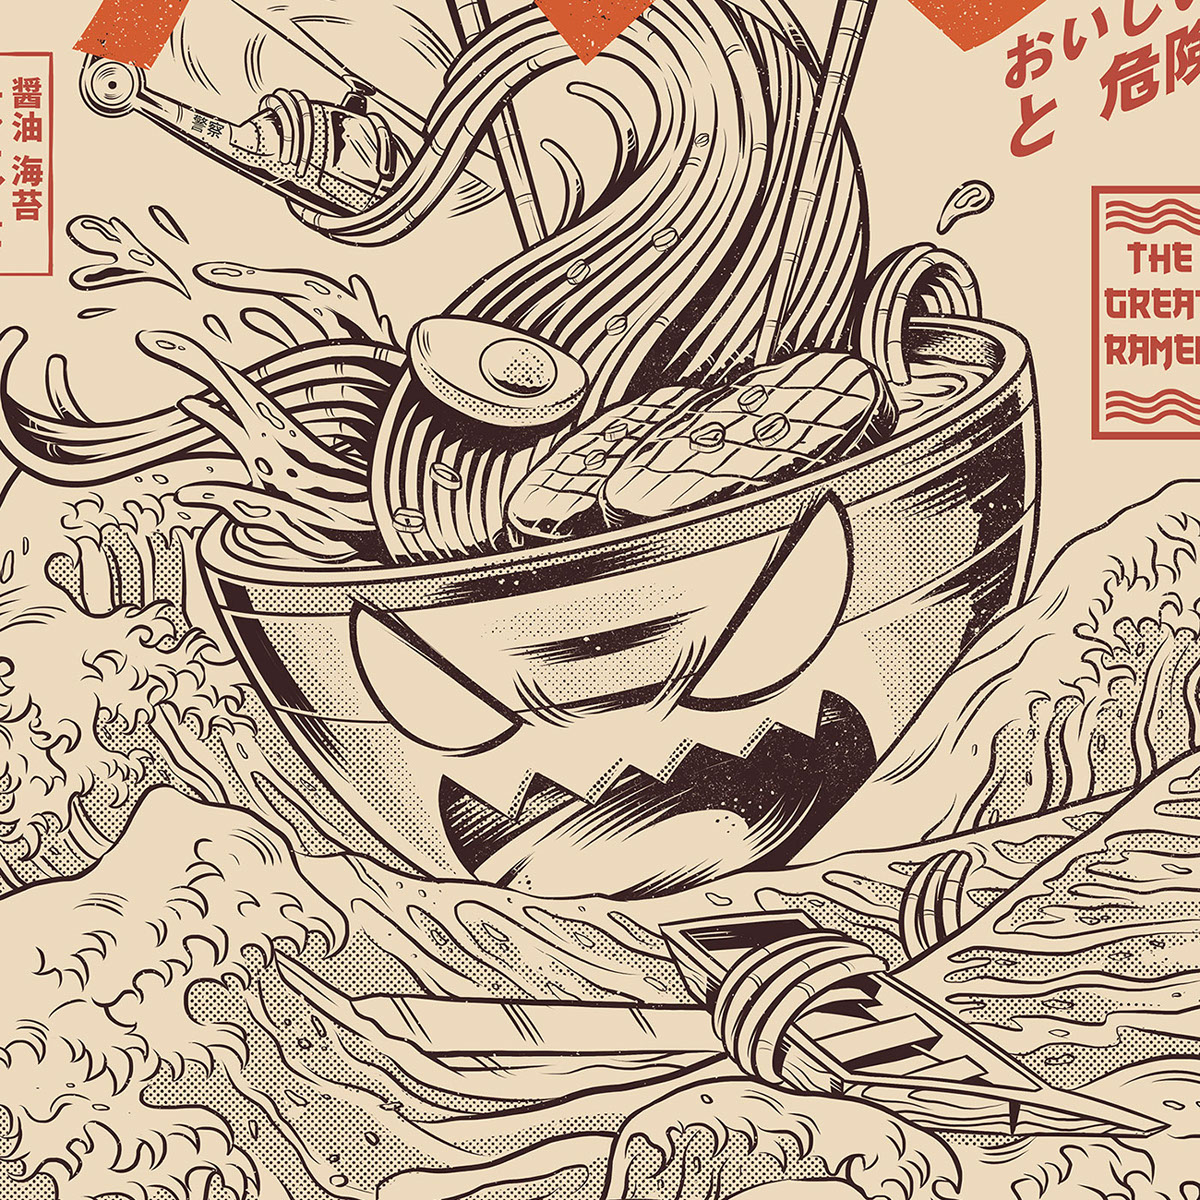 The real cause behind this wave, The Great Ramen! 